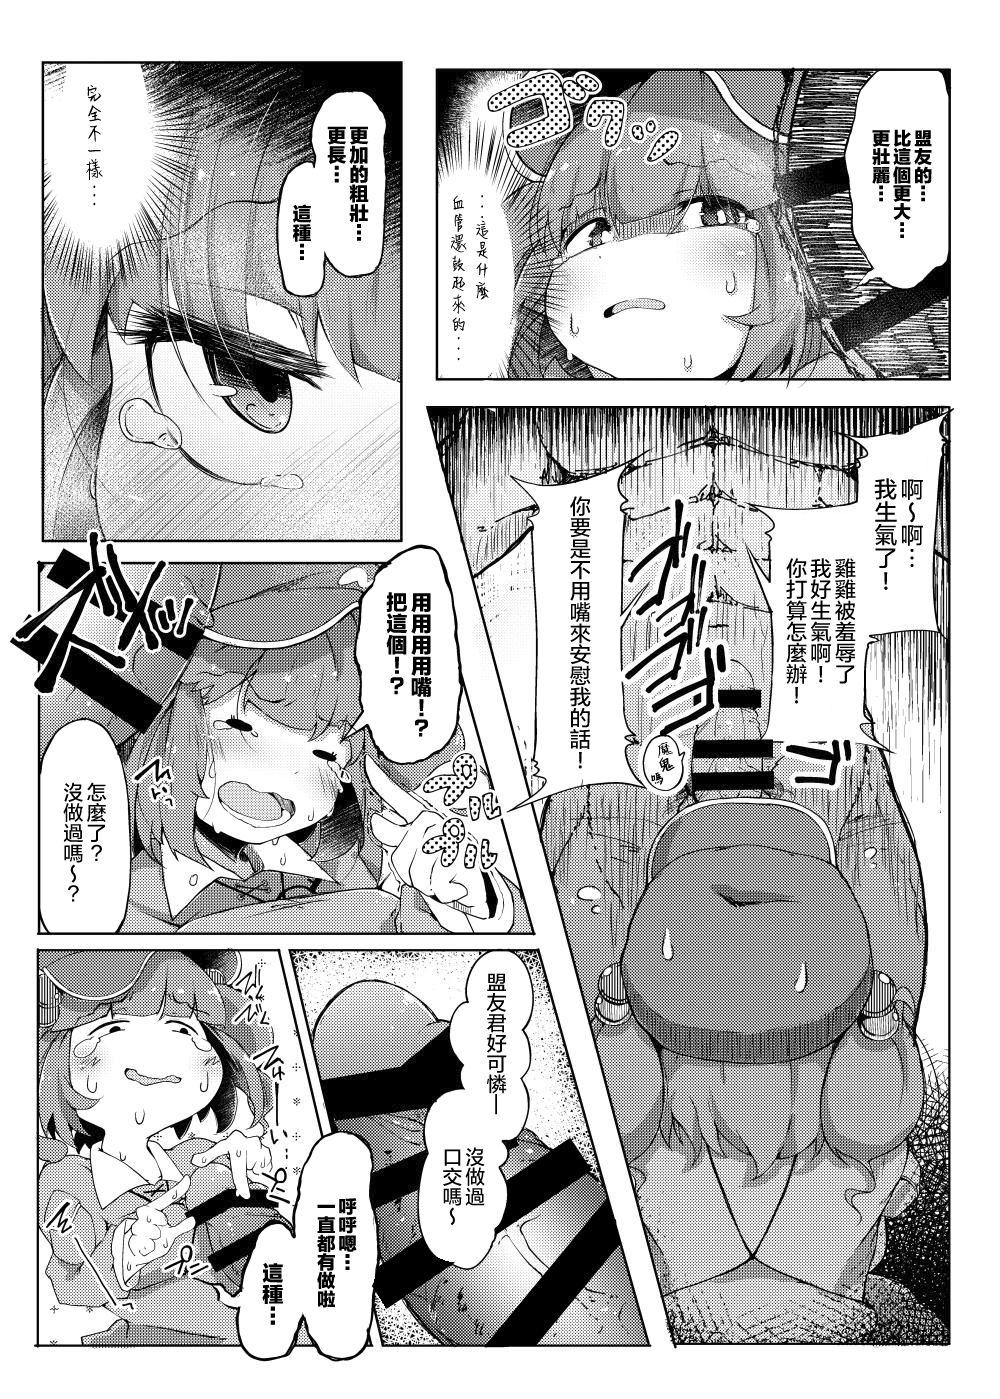 Funny NTR - Touhou project Fingering - Page 9